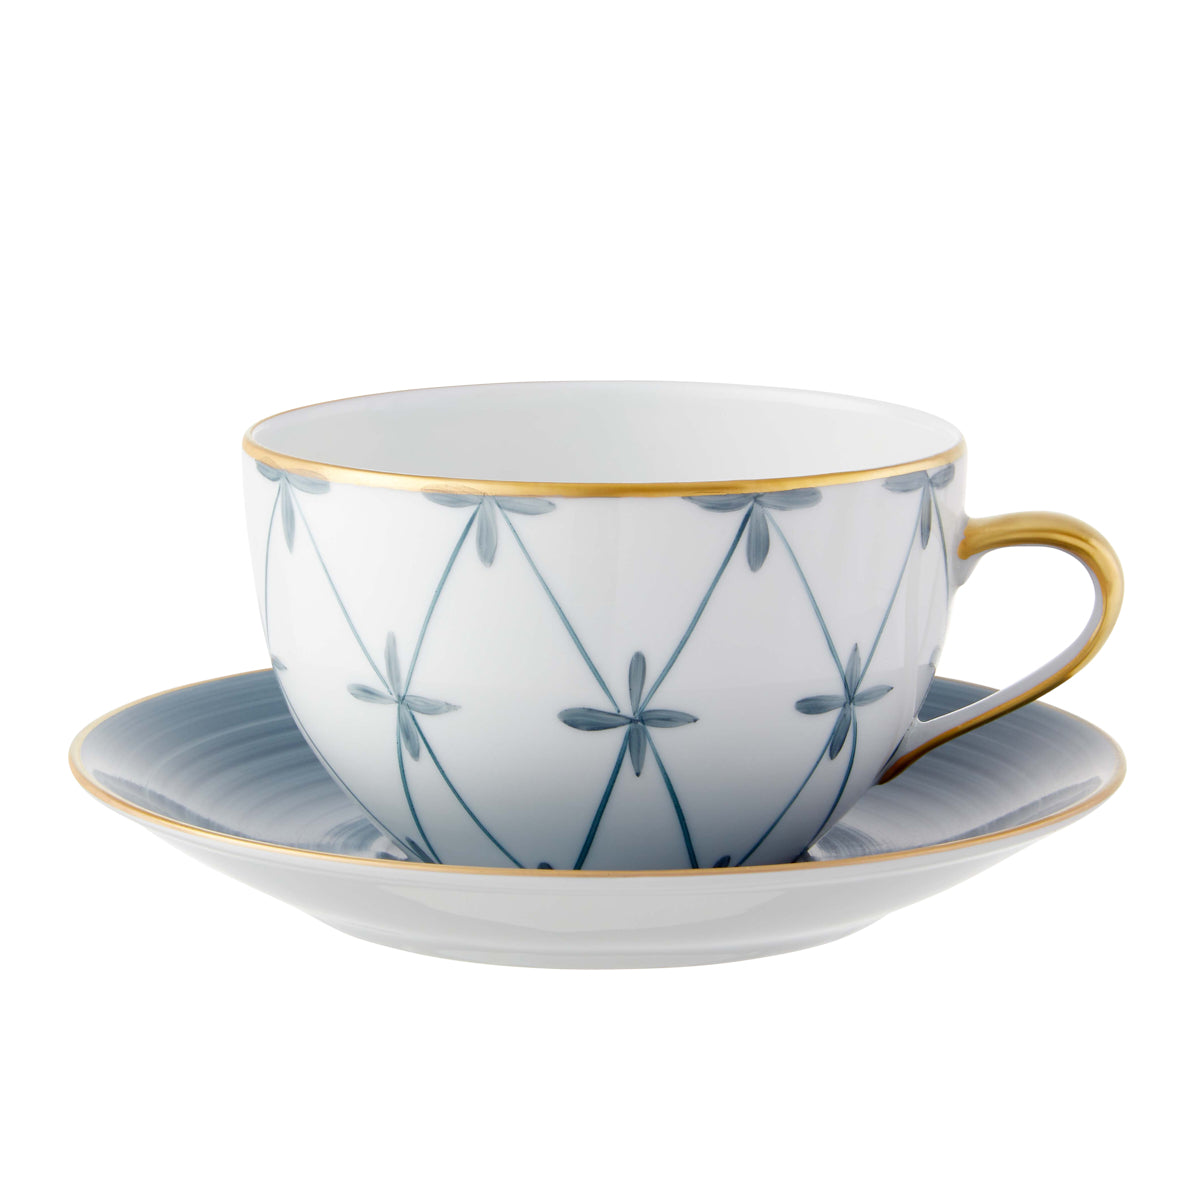 Nina Campbell Breakfast Cup & Saucer Floral - Blue